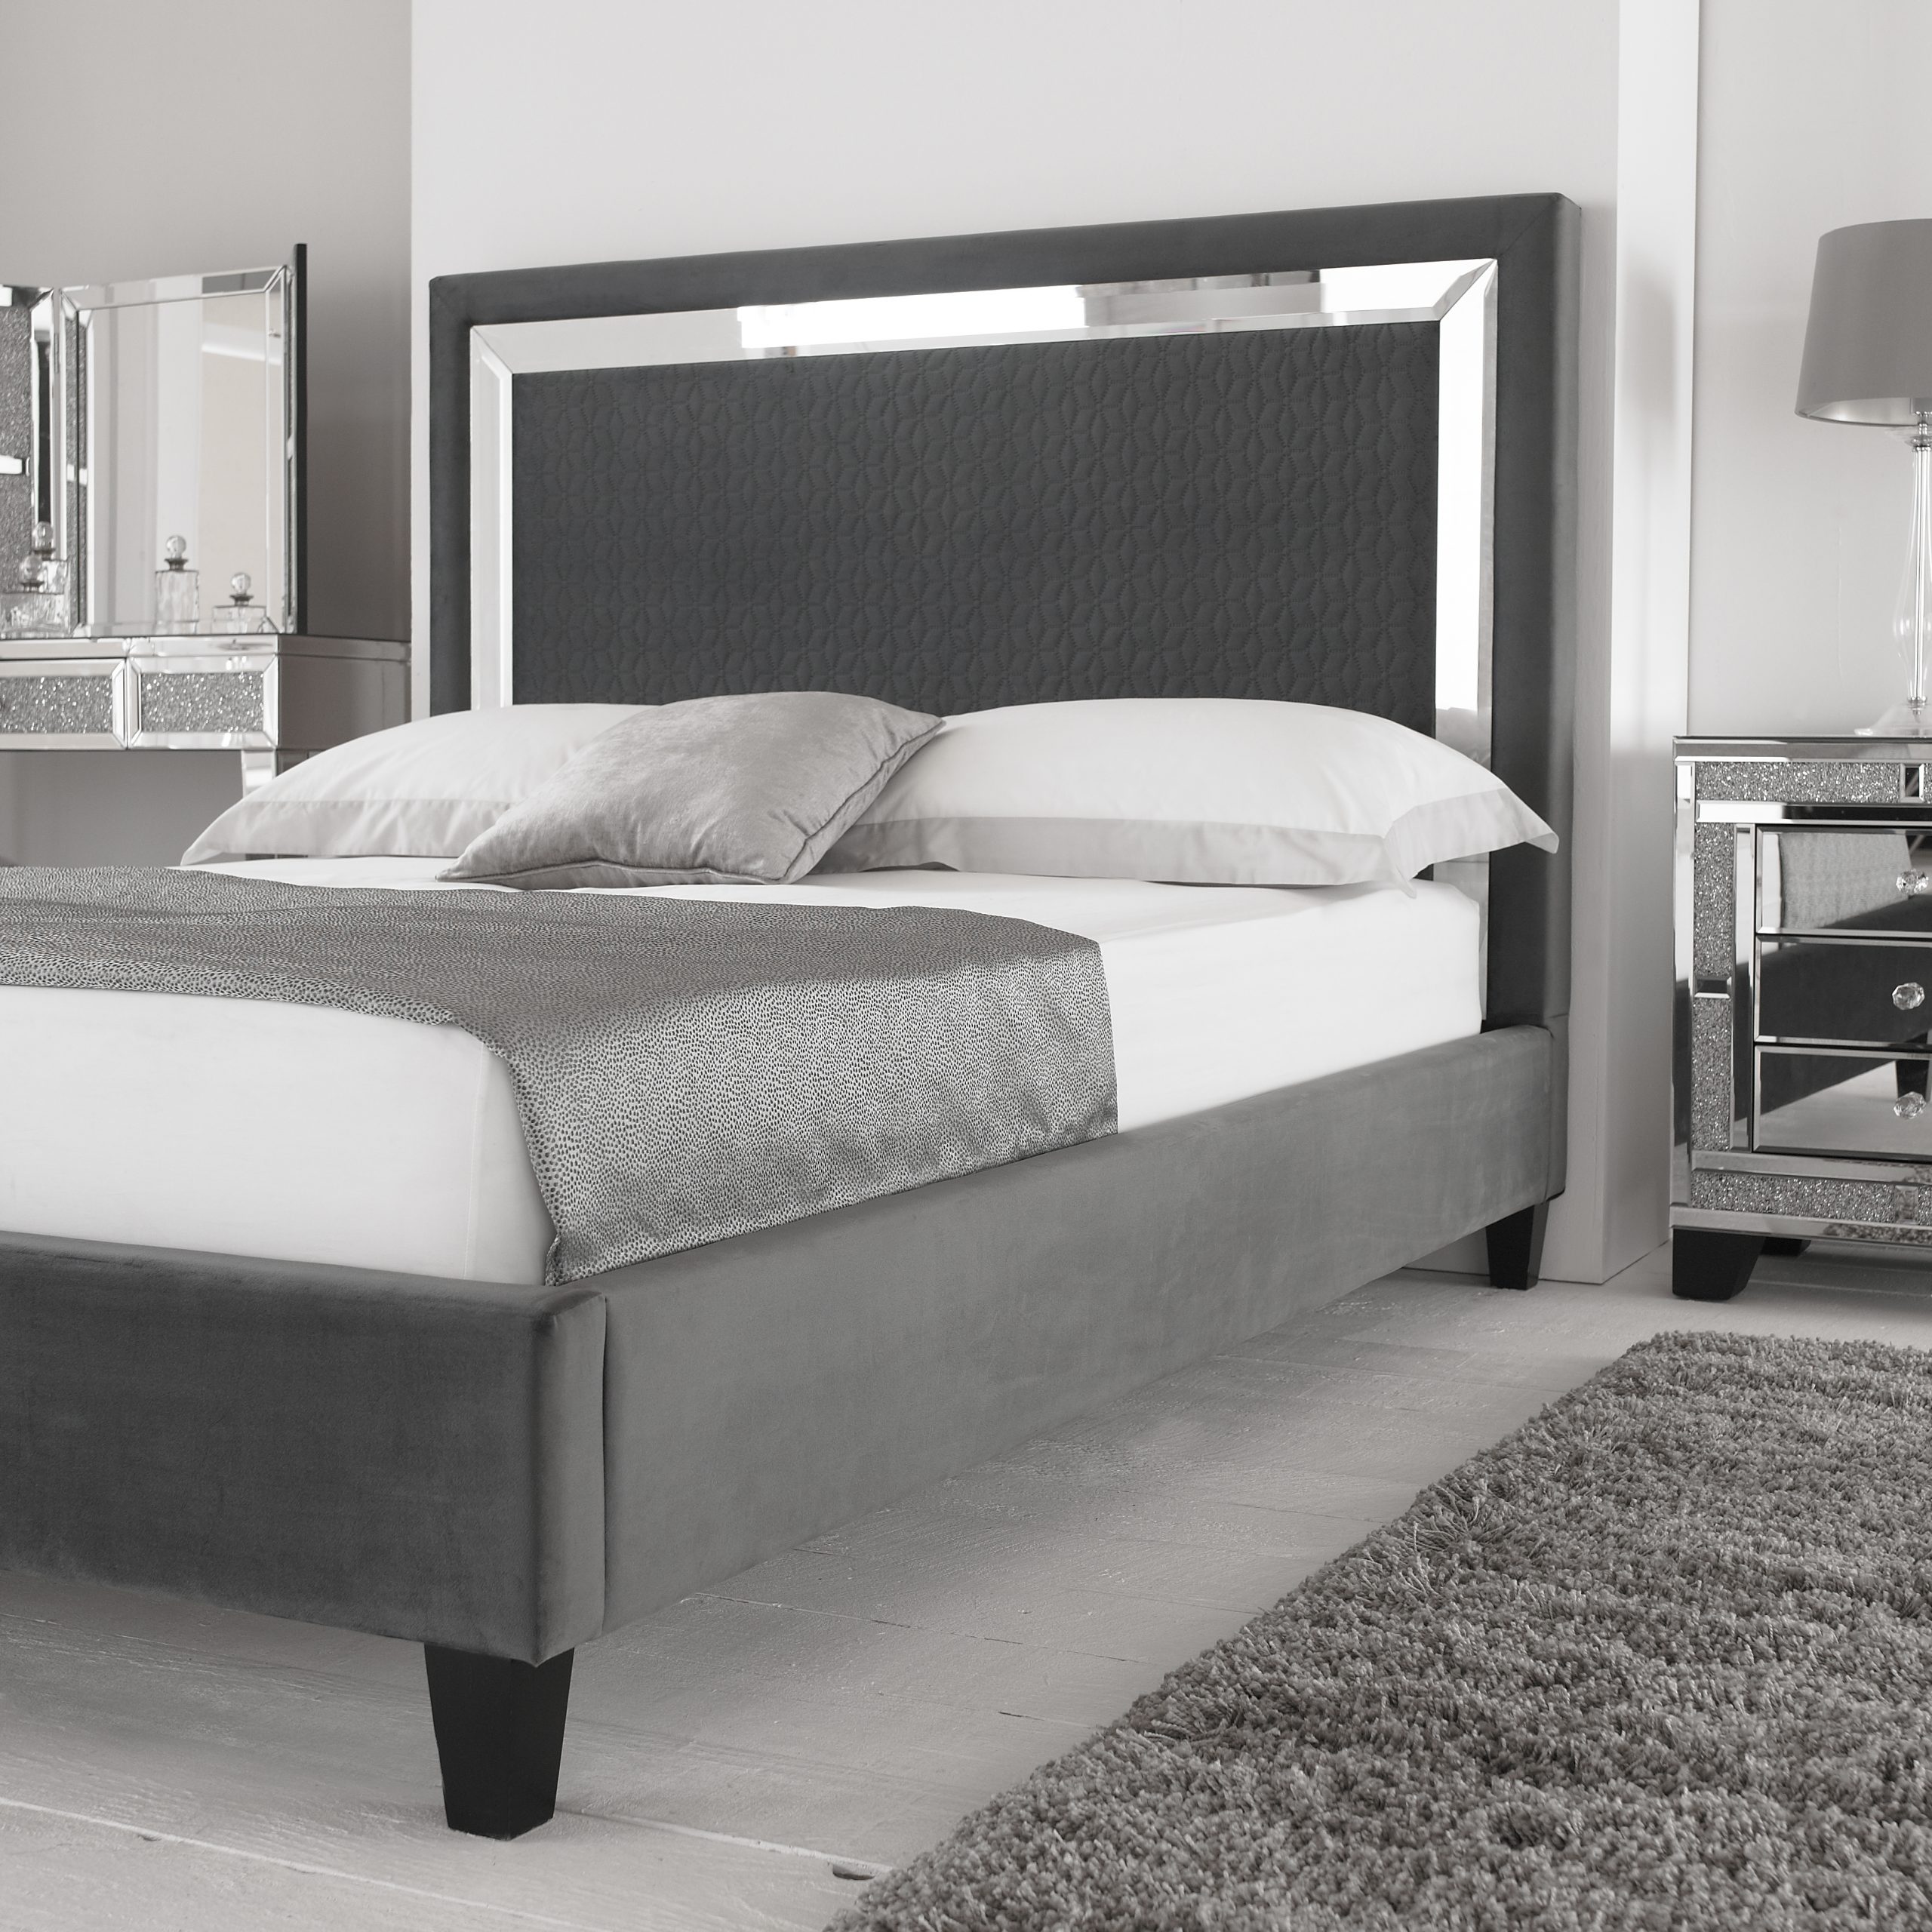 Harmony Bed Frame Ats Carpets And Furniture